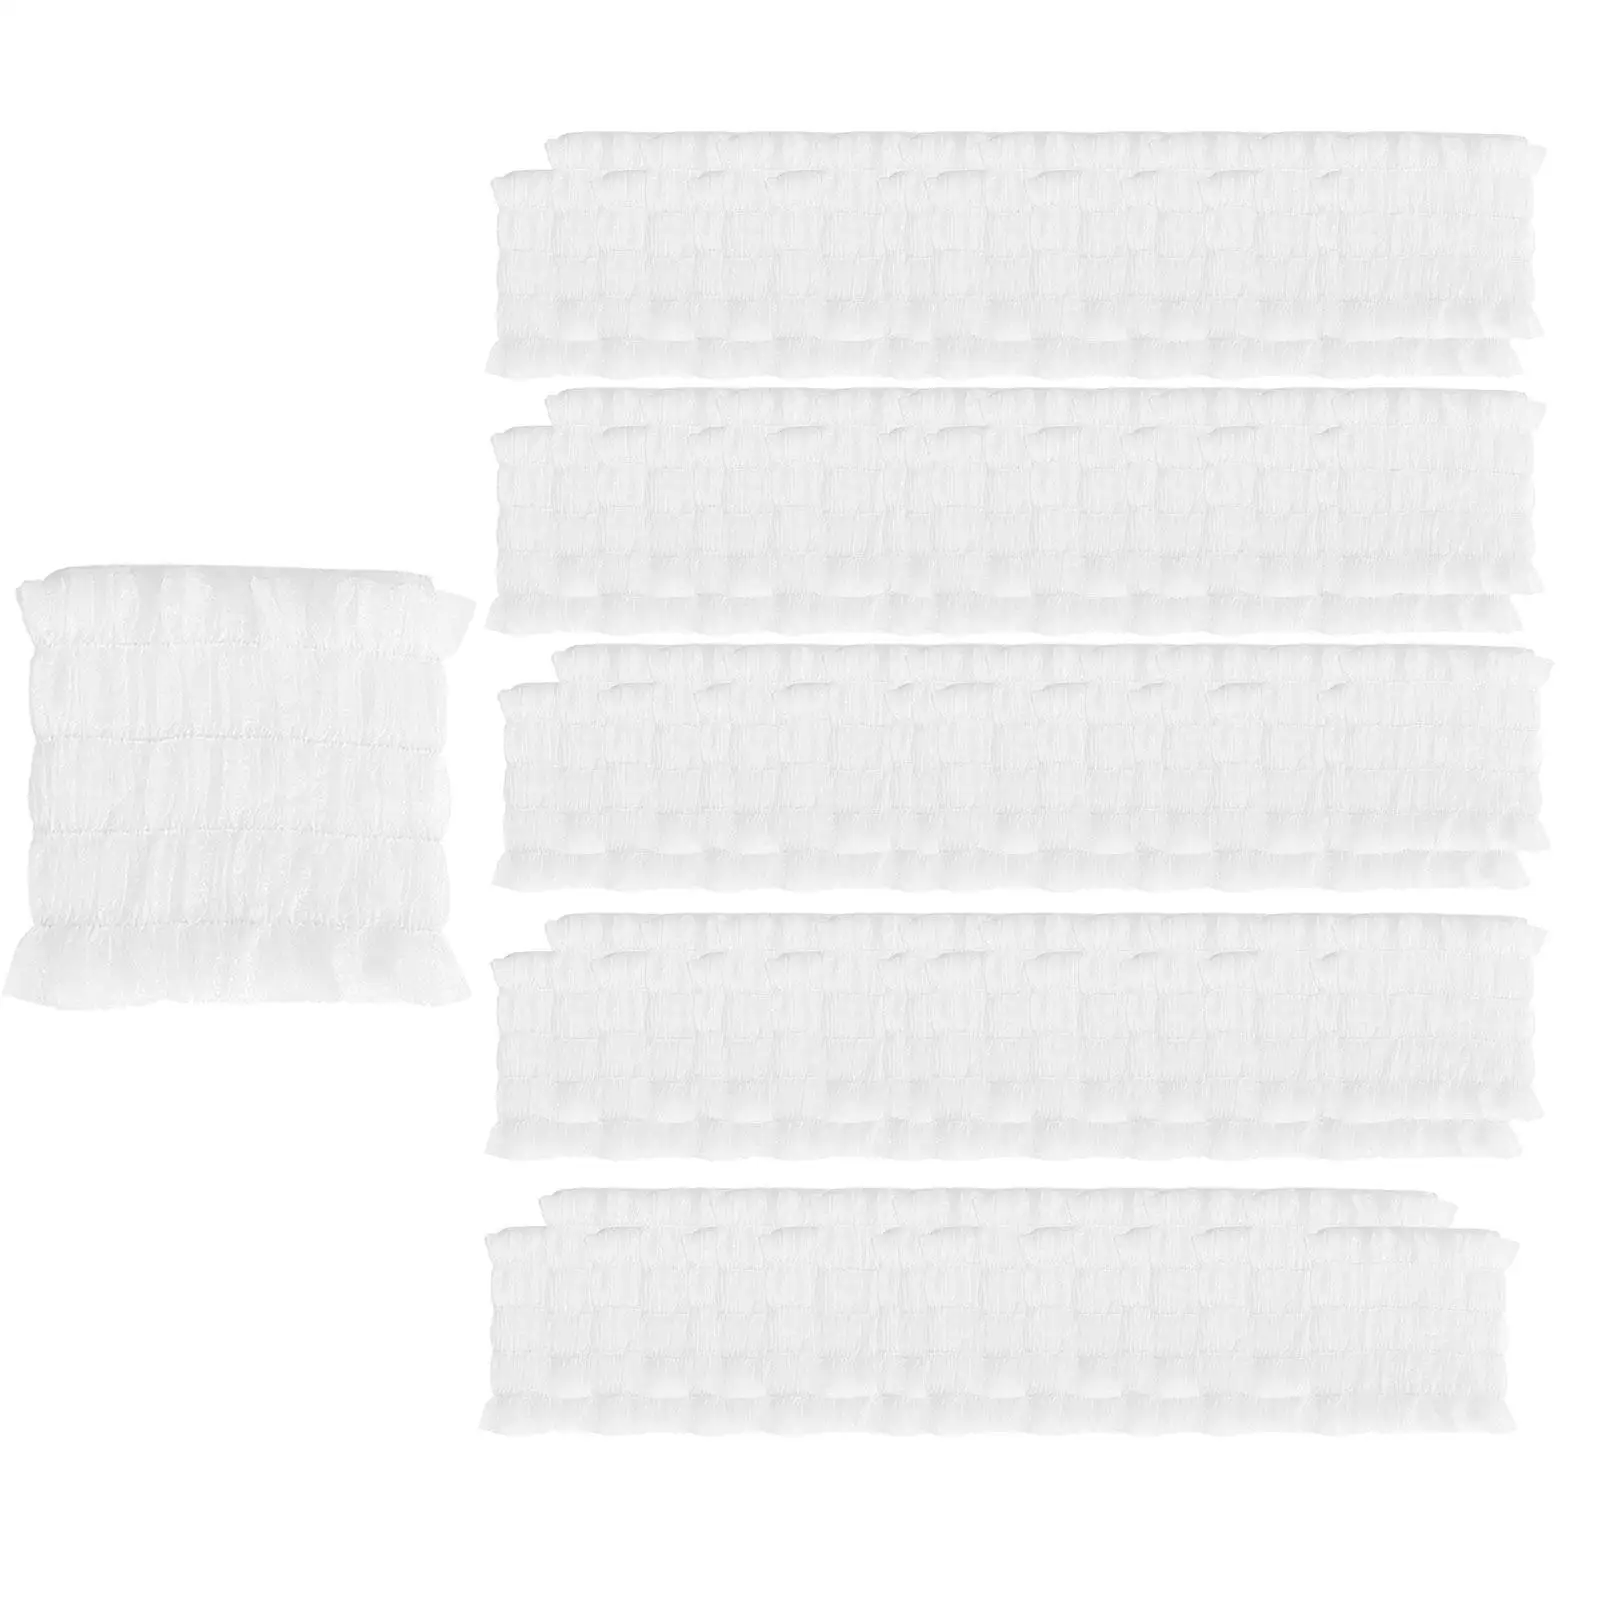 100Pcs Hair Tie Facial Beauty Supply Towels for Face Beauty Headbands Hair Hoop for Hospital Makeup Bath Shower Skincare Party